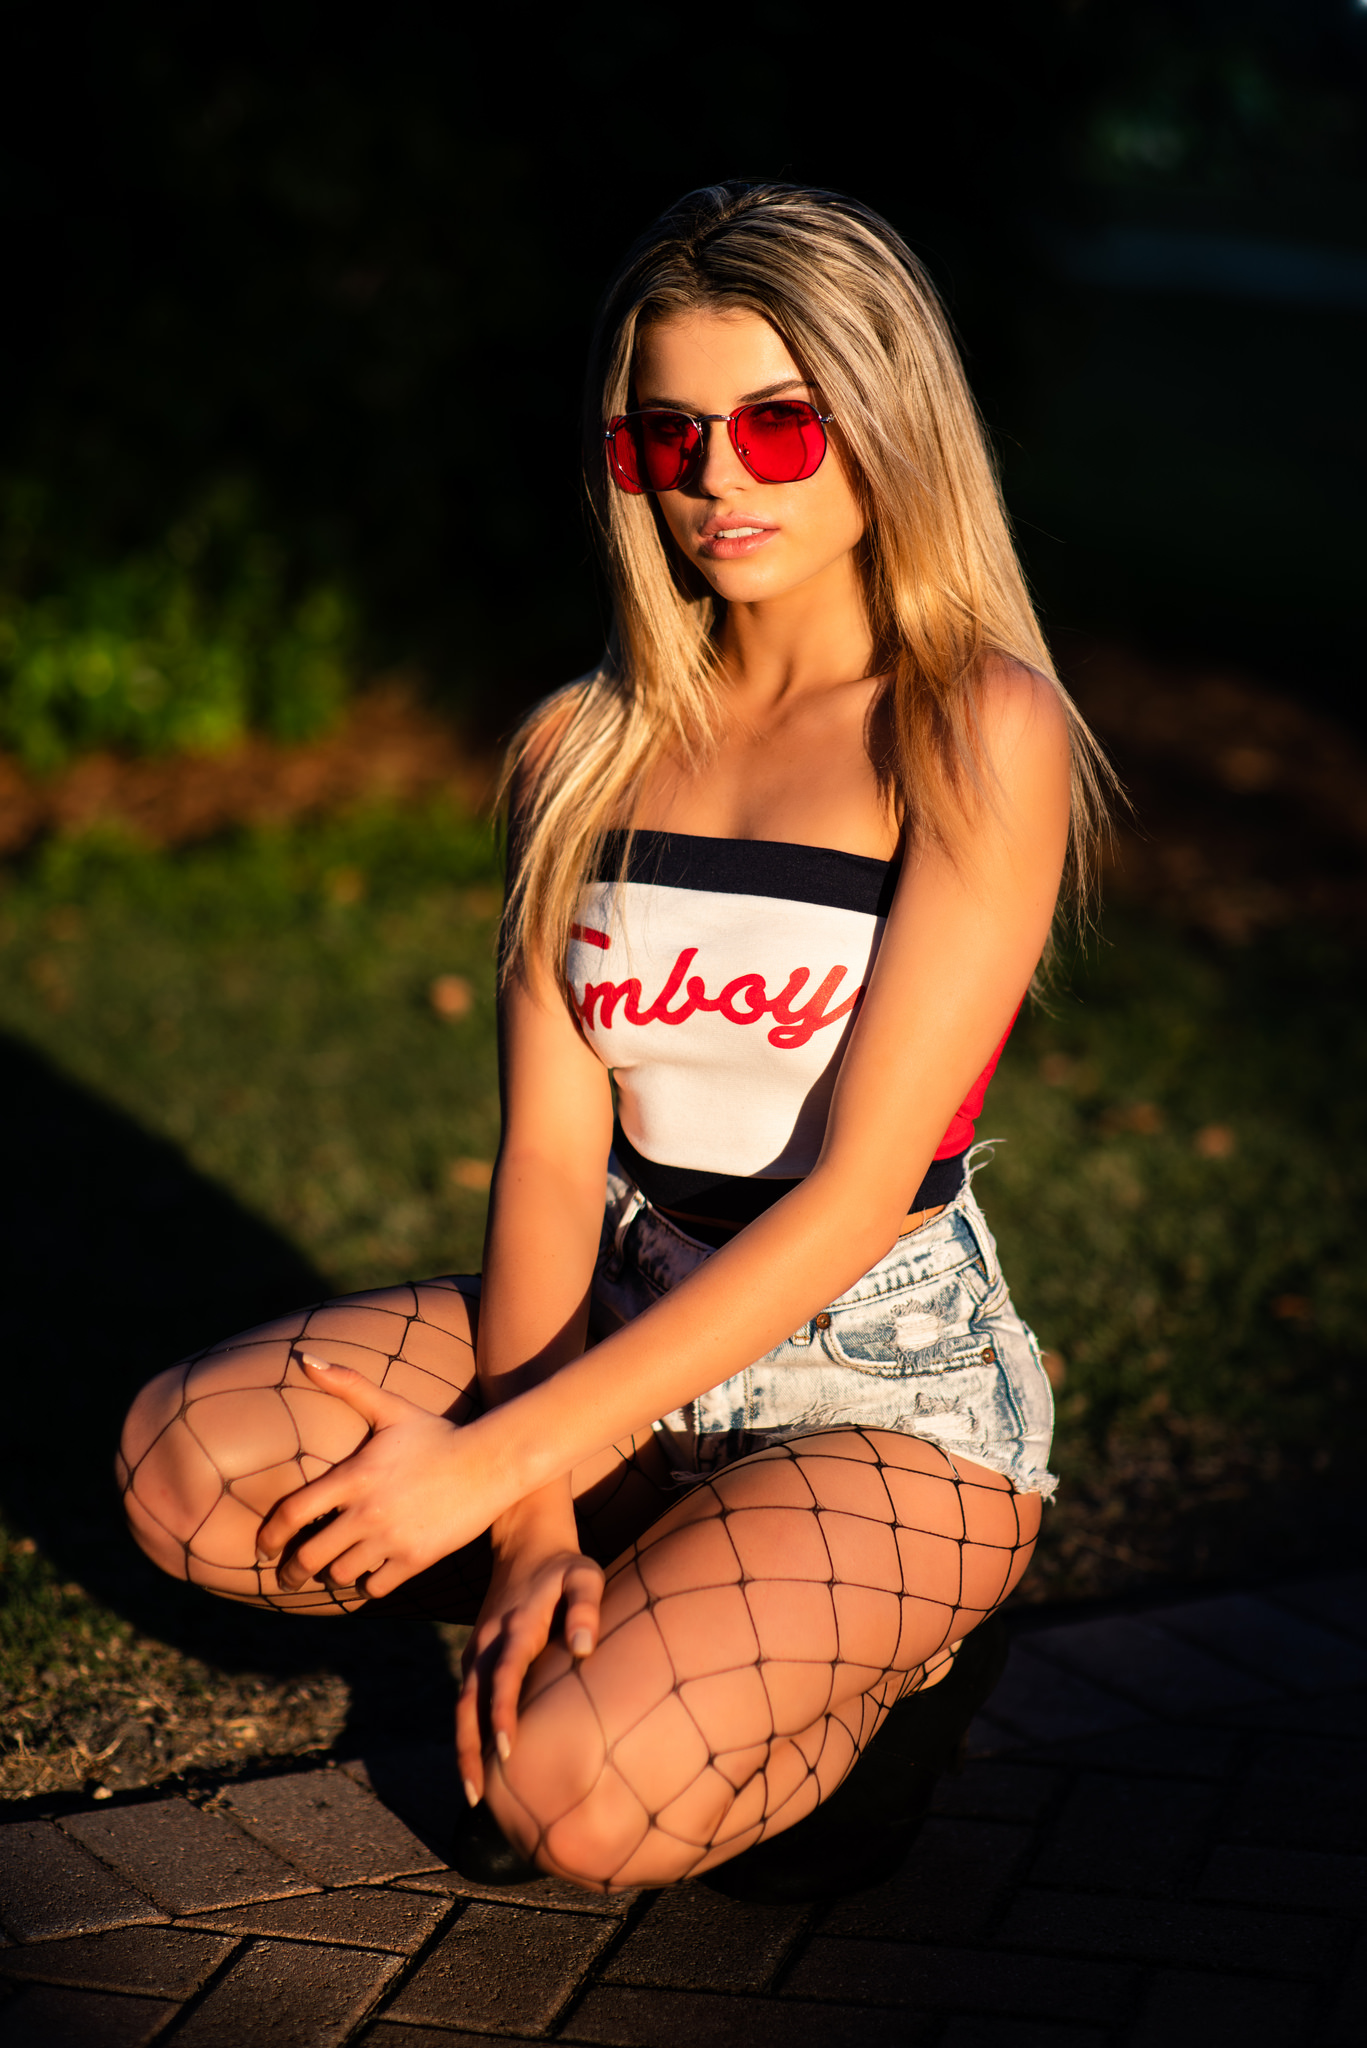 Cassidy Coliskey Women Blonde Model Looking At Viewer Sunglasses Depth Of Field Crop Top Bare Should 1367x2048